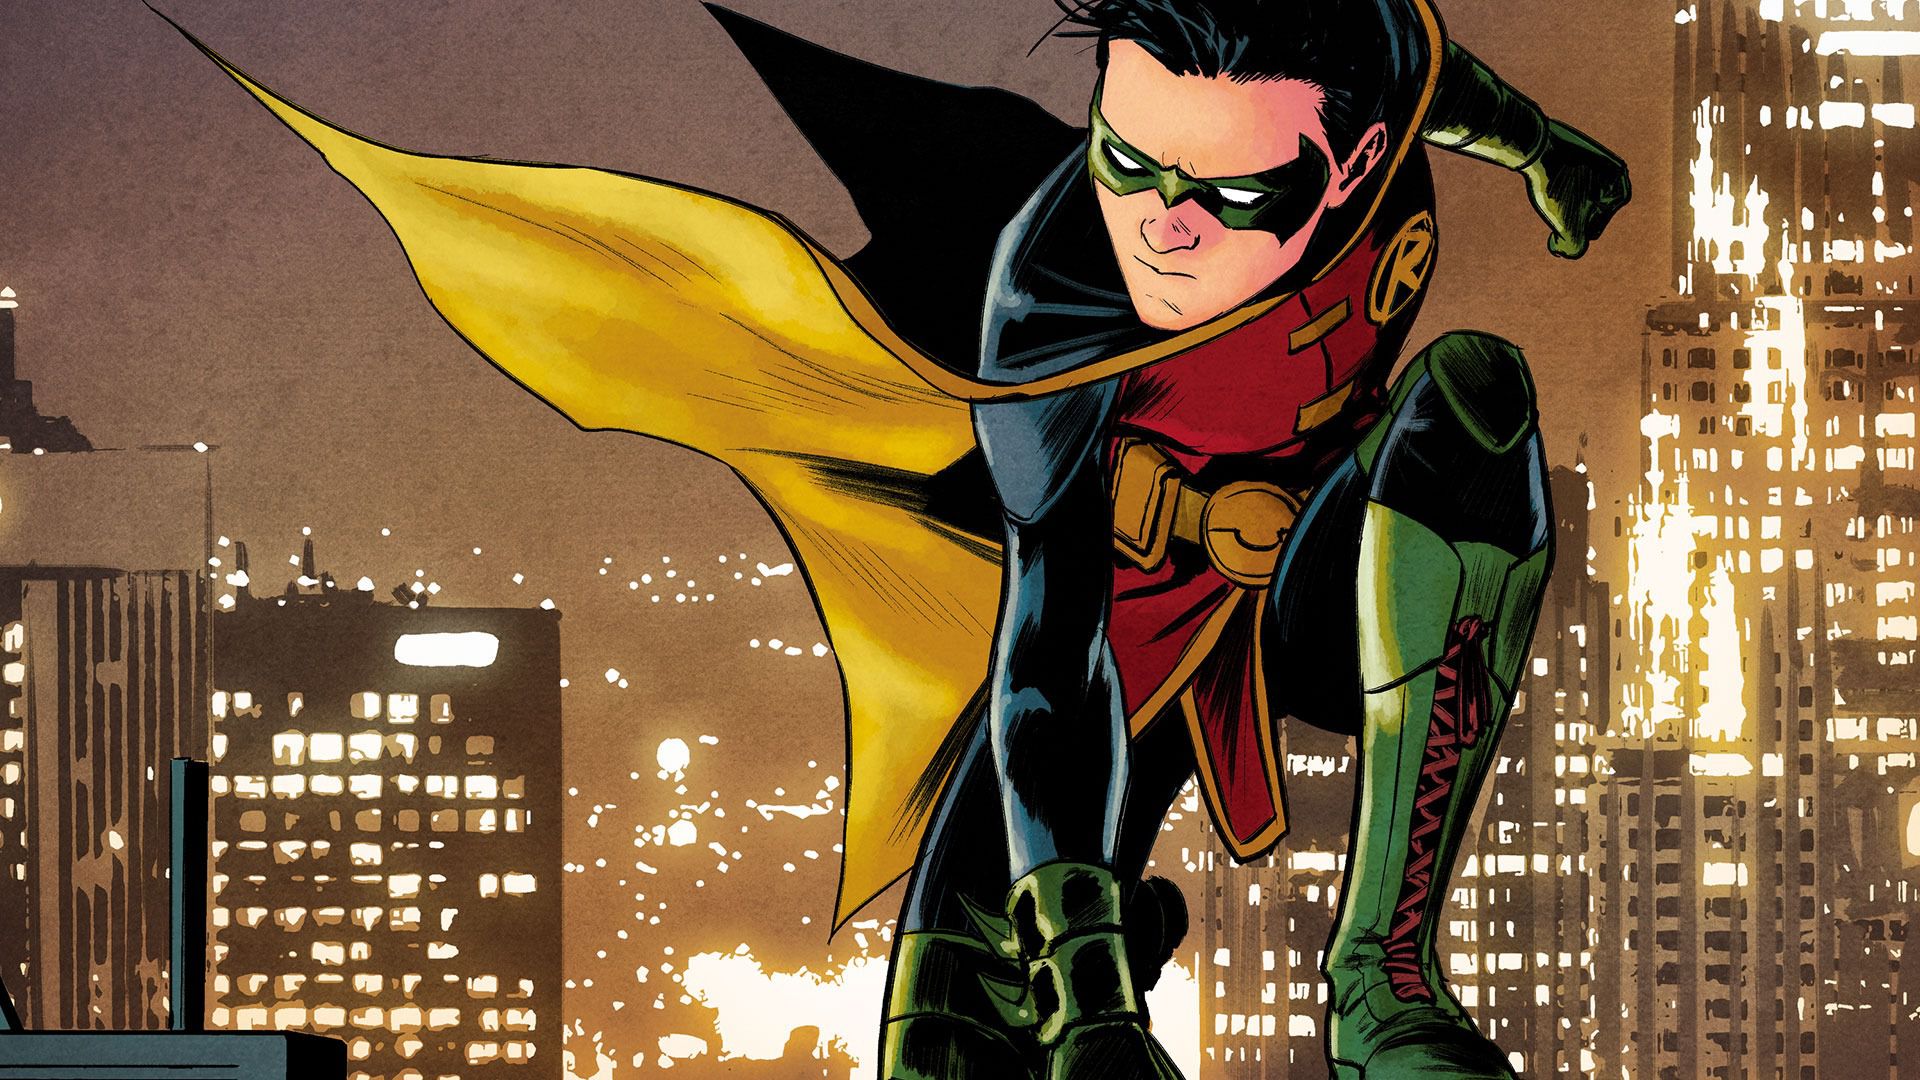 a panel showing Damian Wayne posing on a rooftop